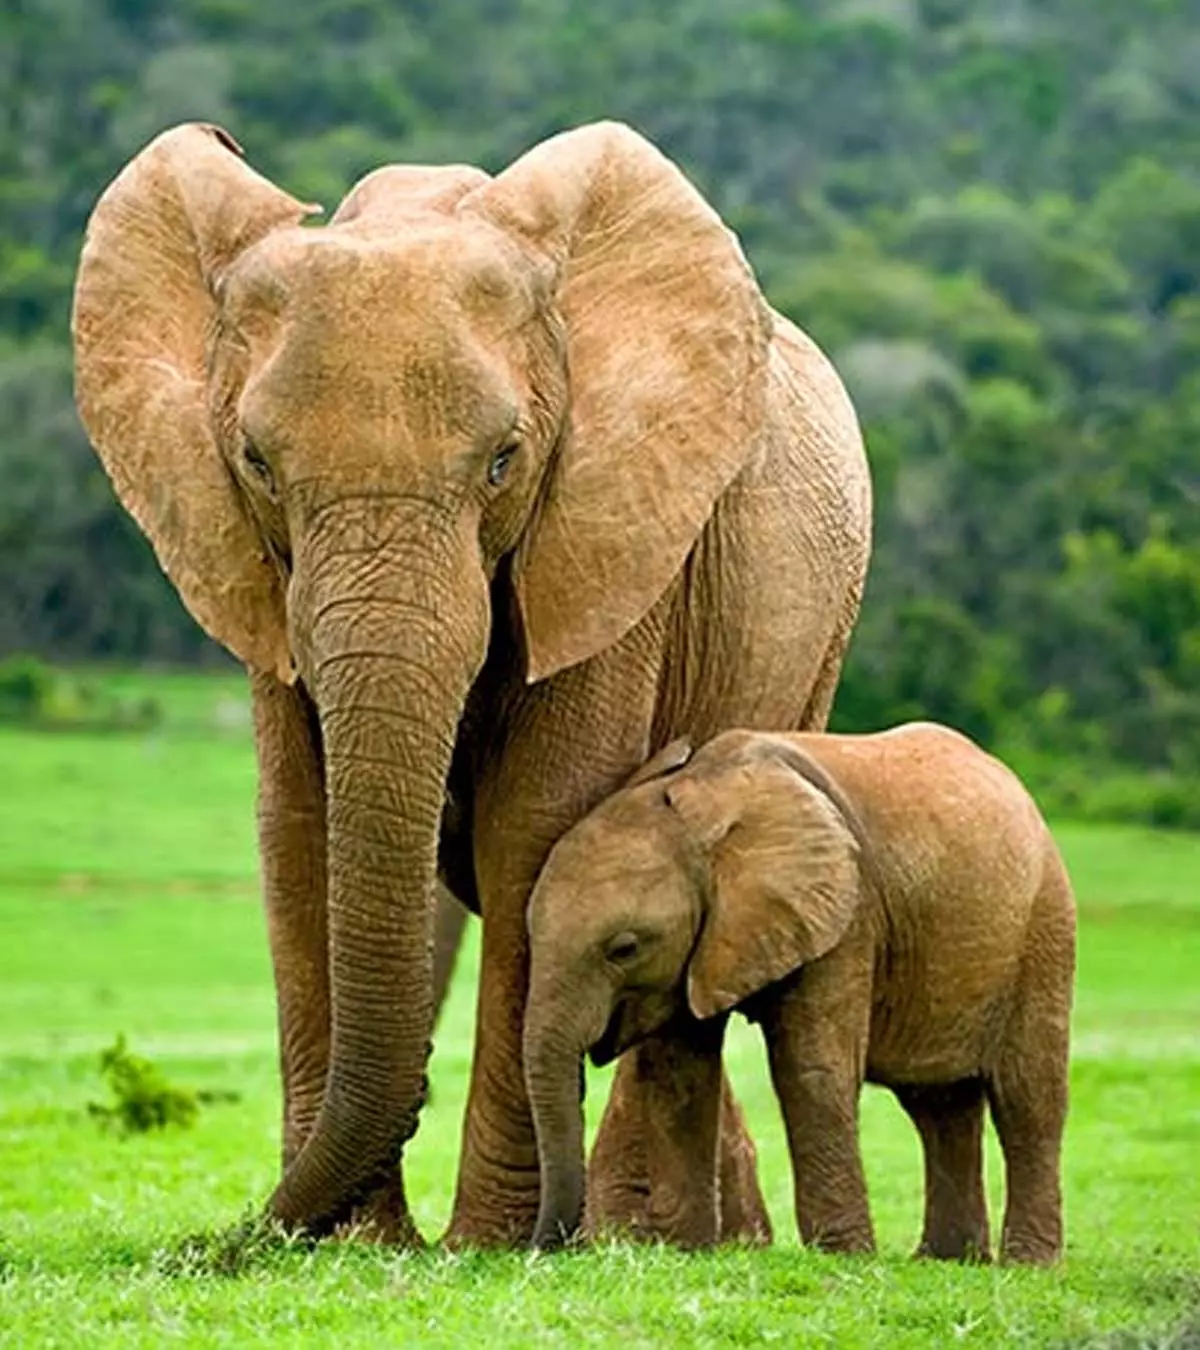 25 Amazing Facts And Information About Elephants For Kids